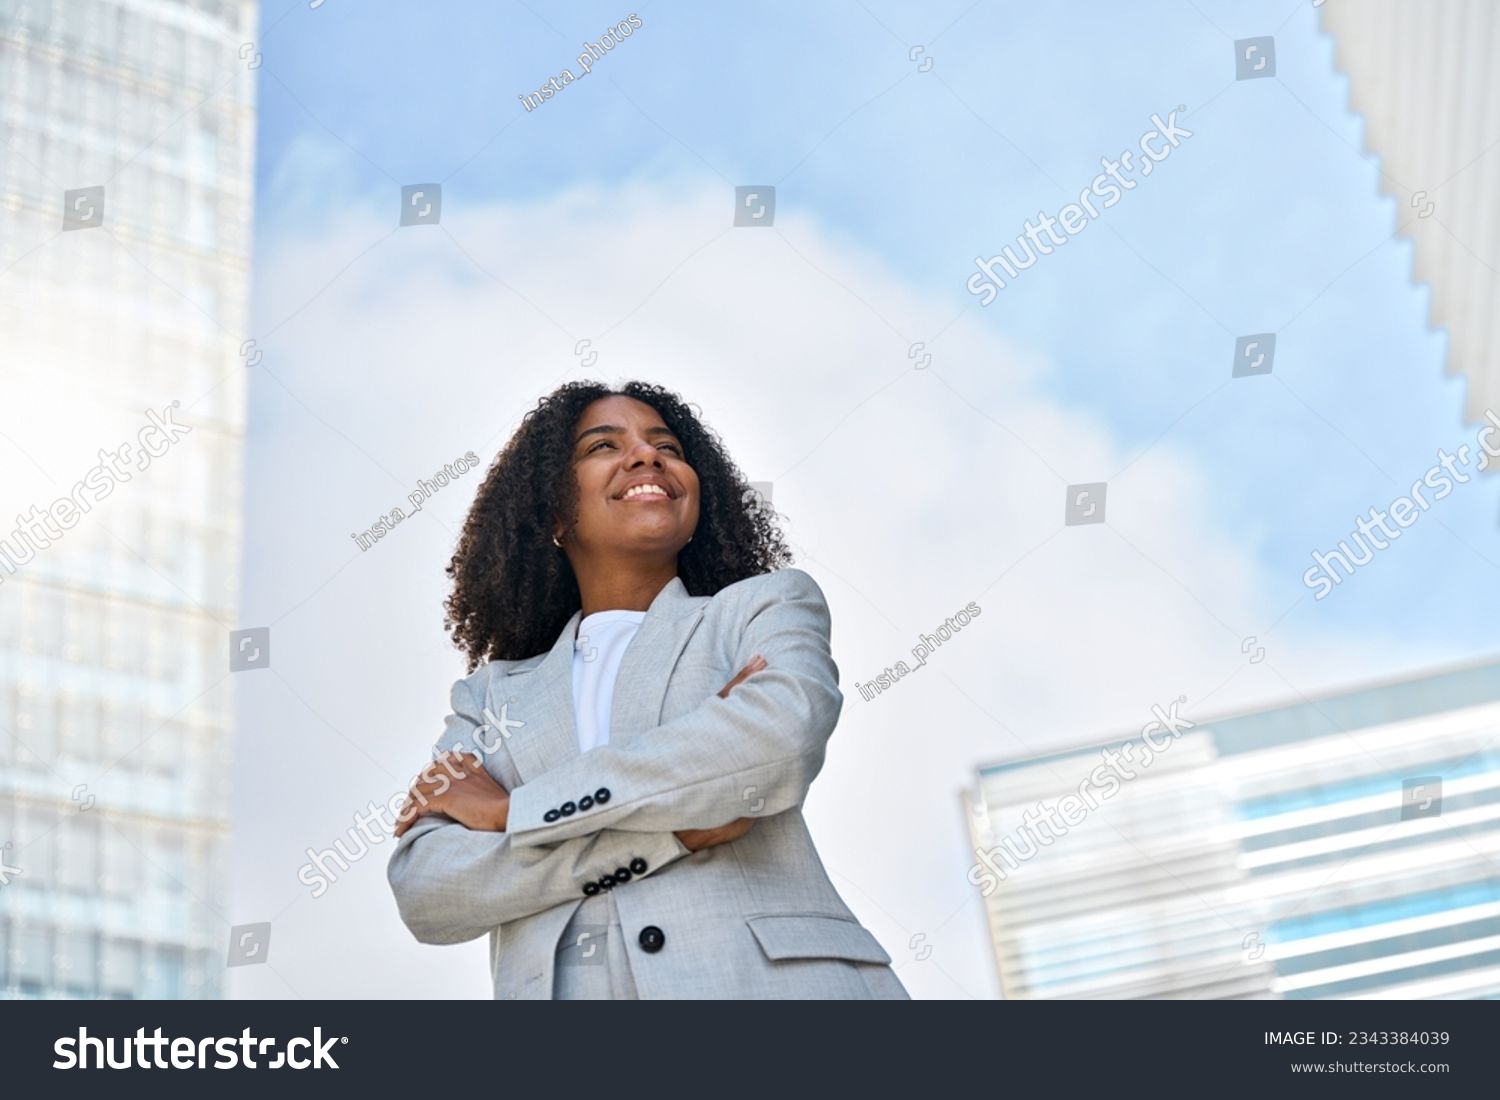 Happy smiling confident young African American professional business woman leader wearing suit standing in big city on street arms crossed thinking of success, dreaming, feeling proud outdoors. #2343384039